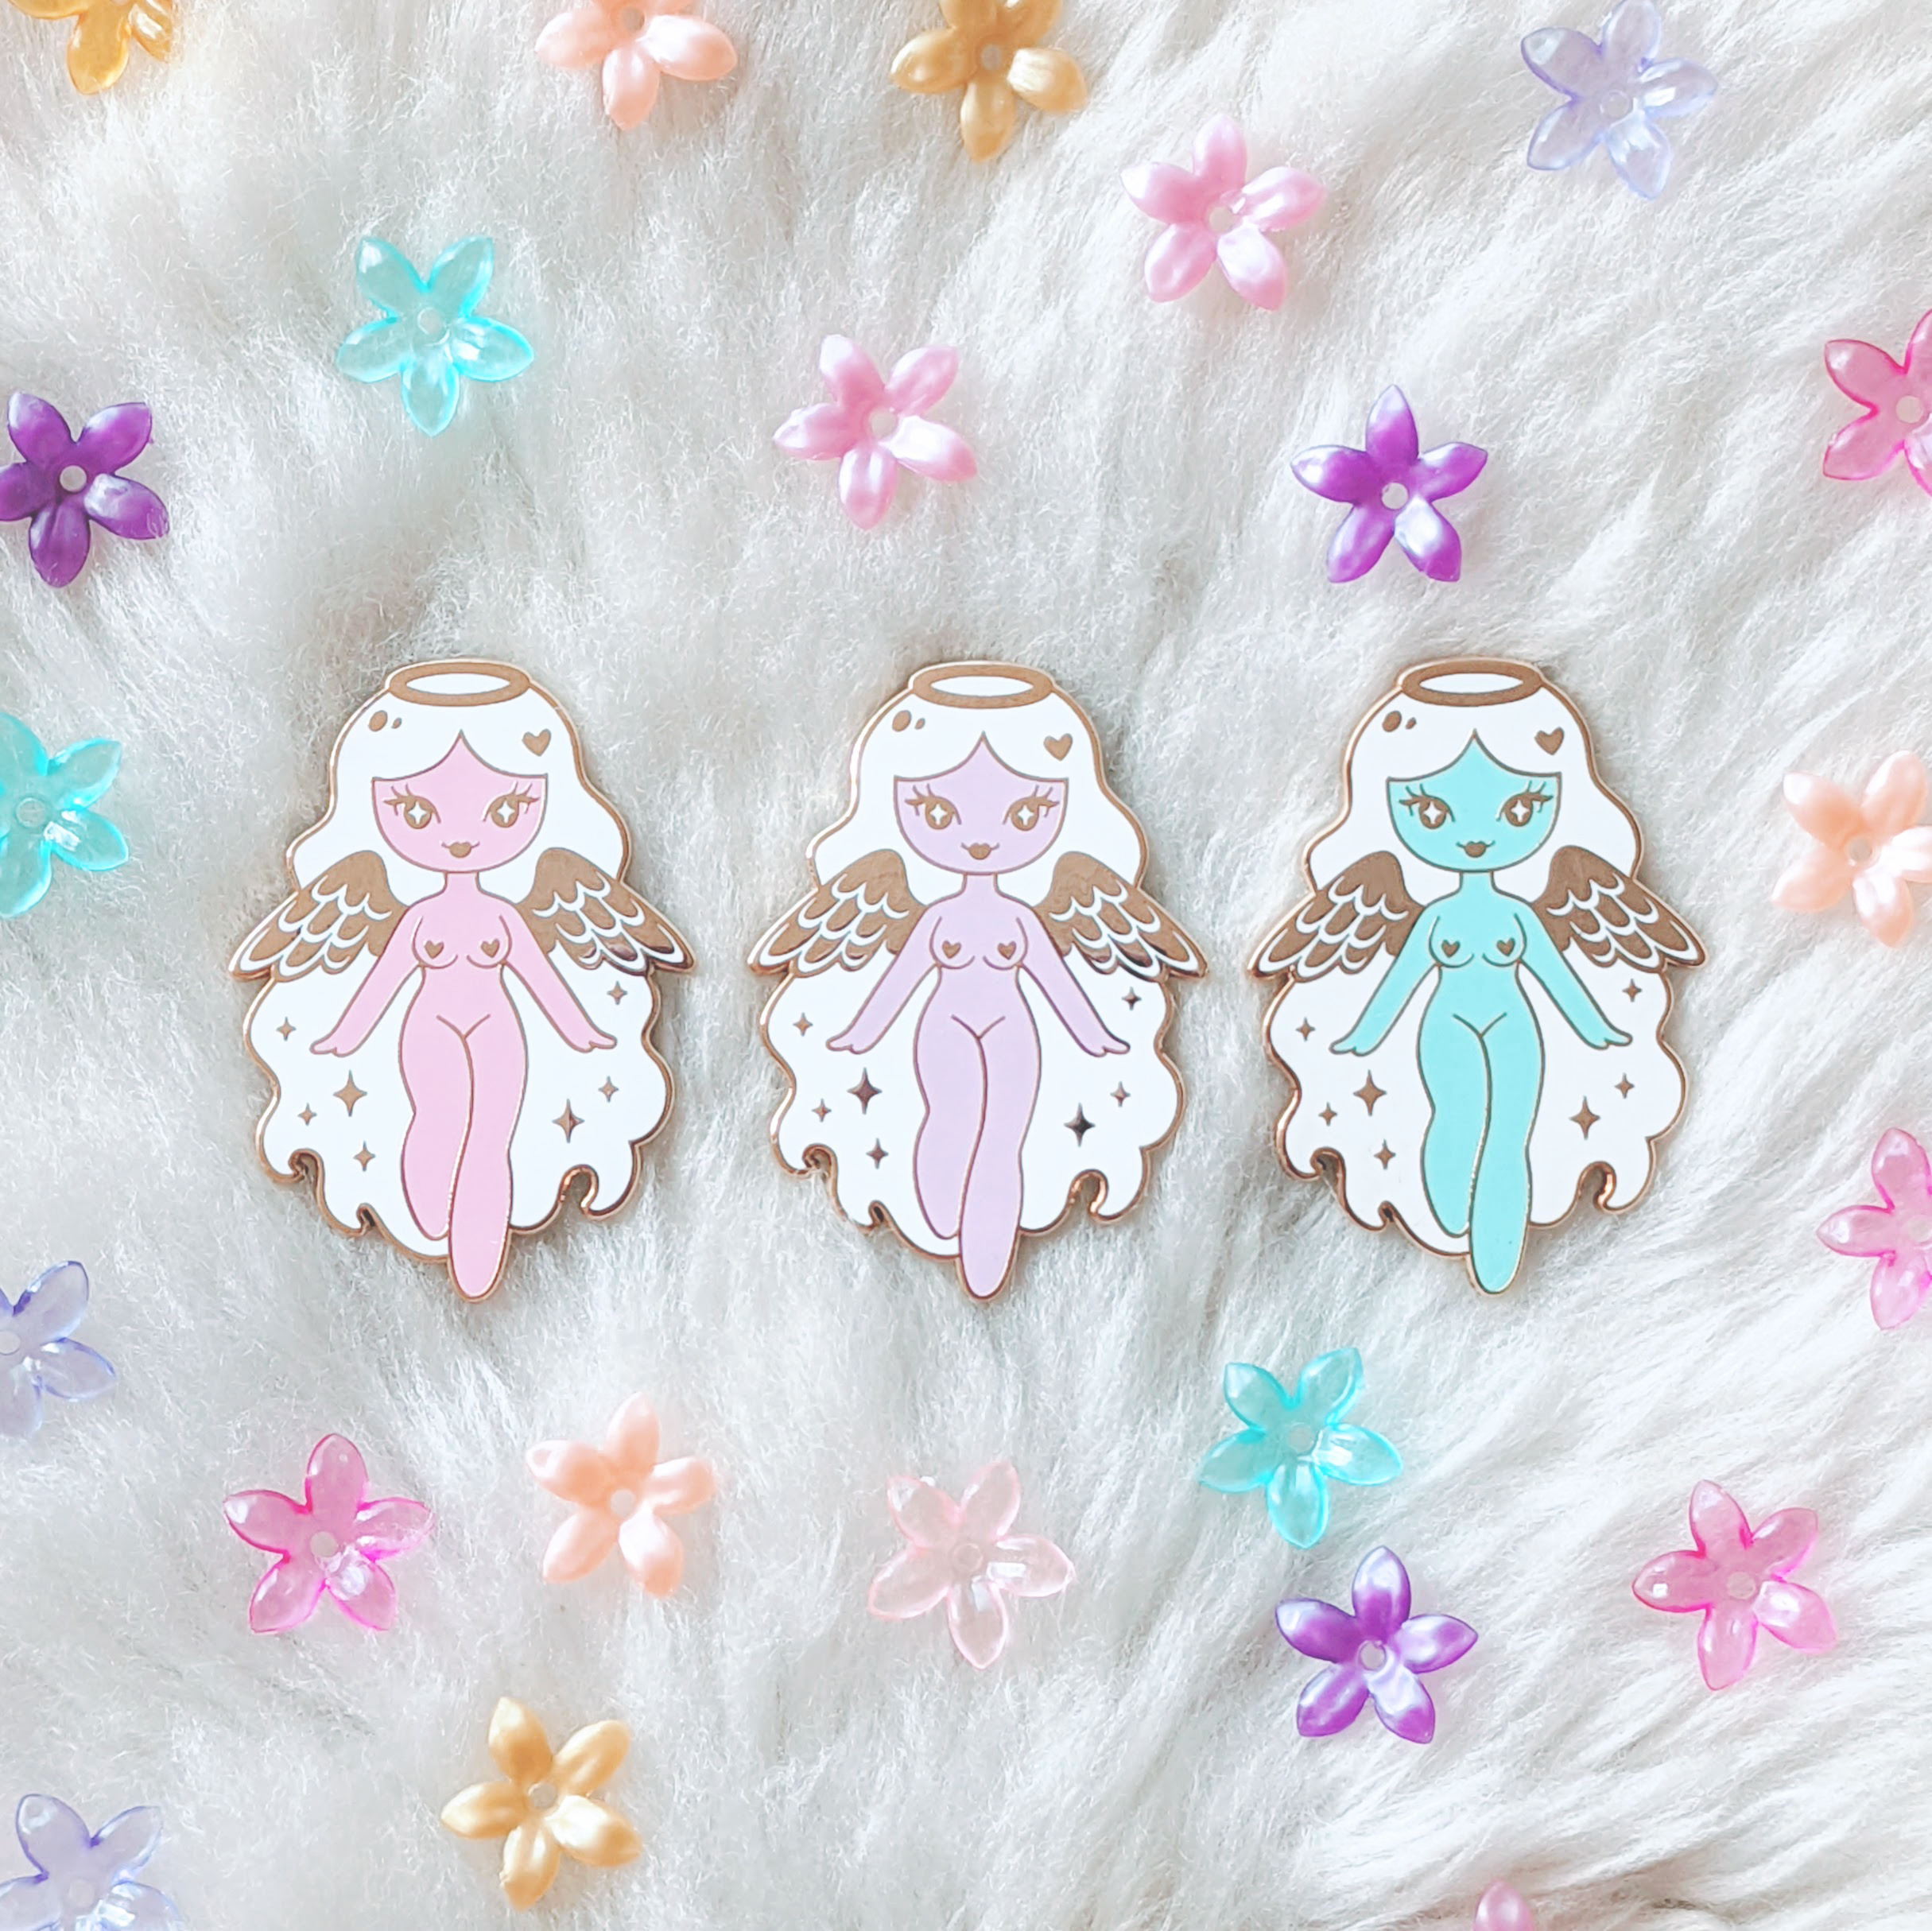 New Yui Angel and Devil Pins!